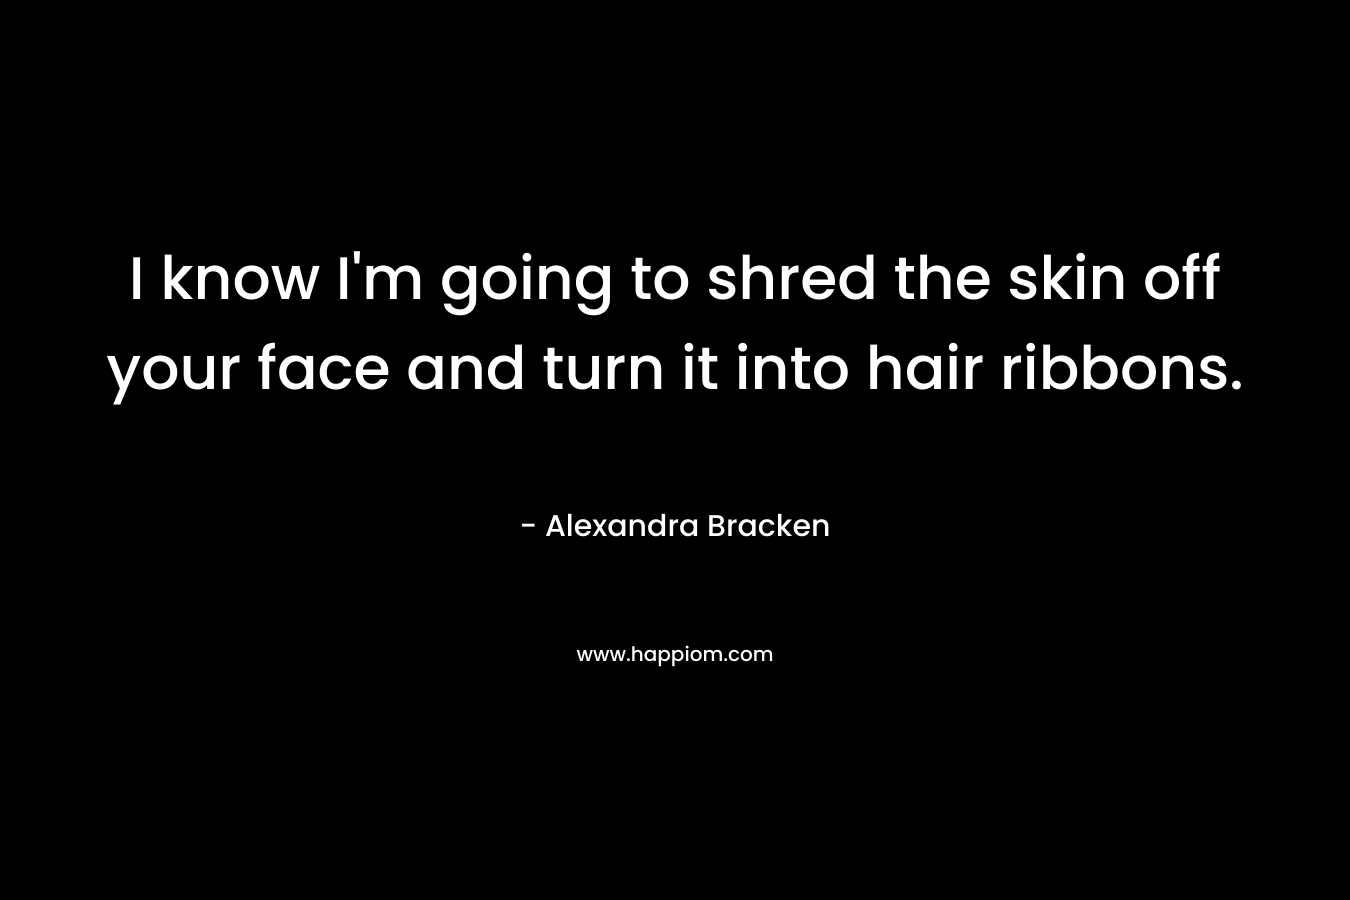 I know I’m going to shred the skin off your face and turn it into hair ribbons. – Alexandra Bracken